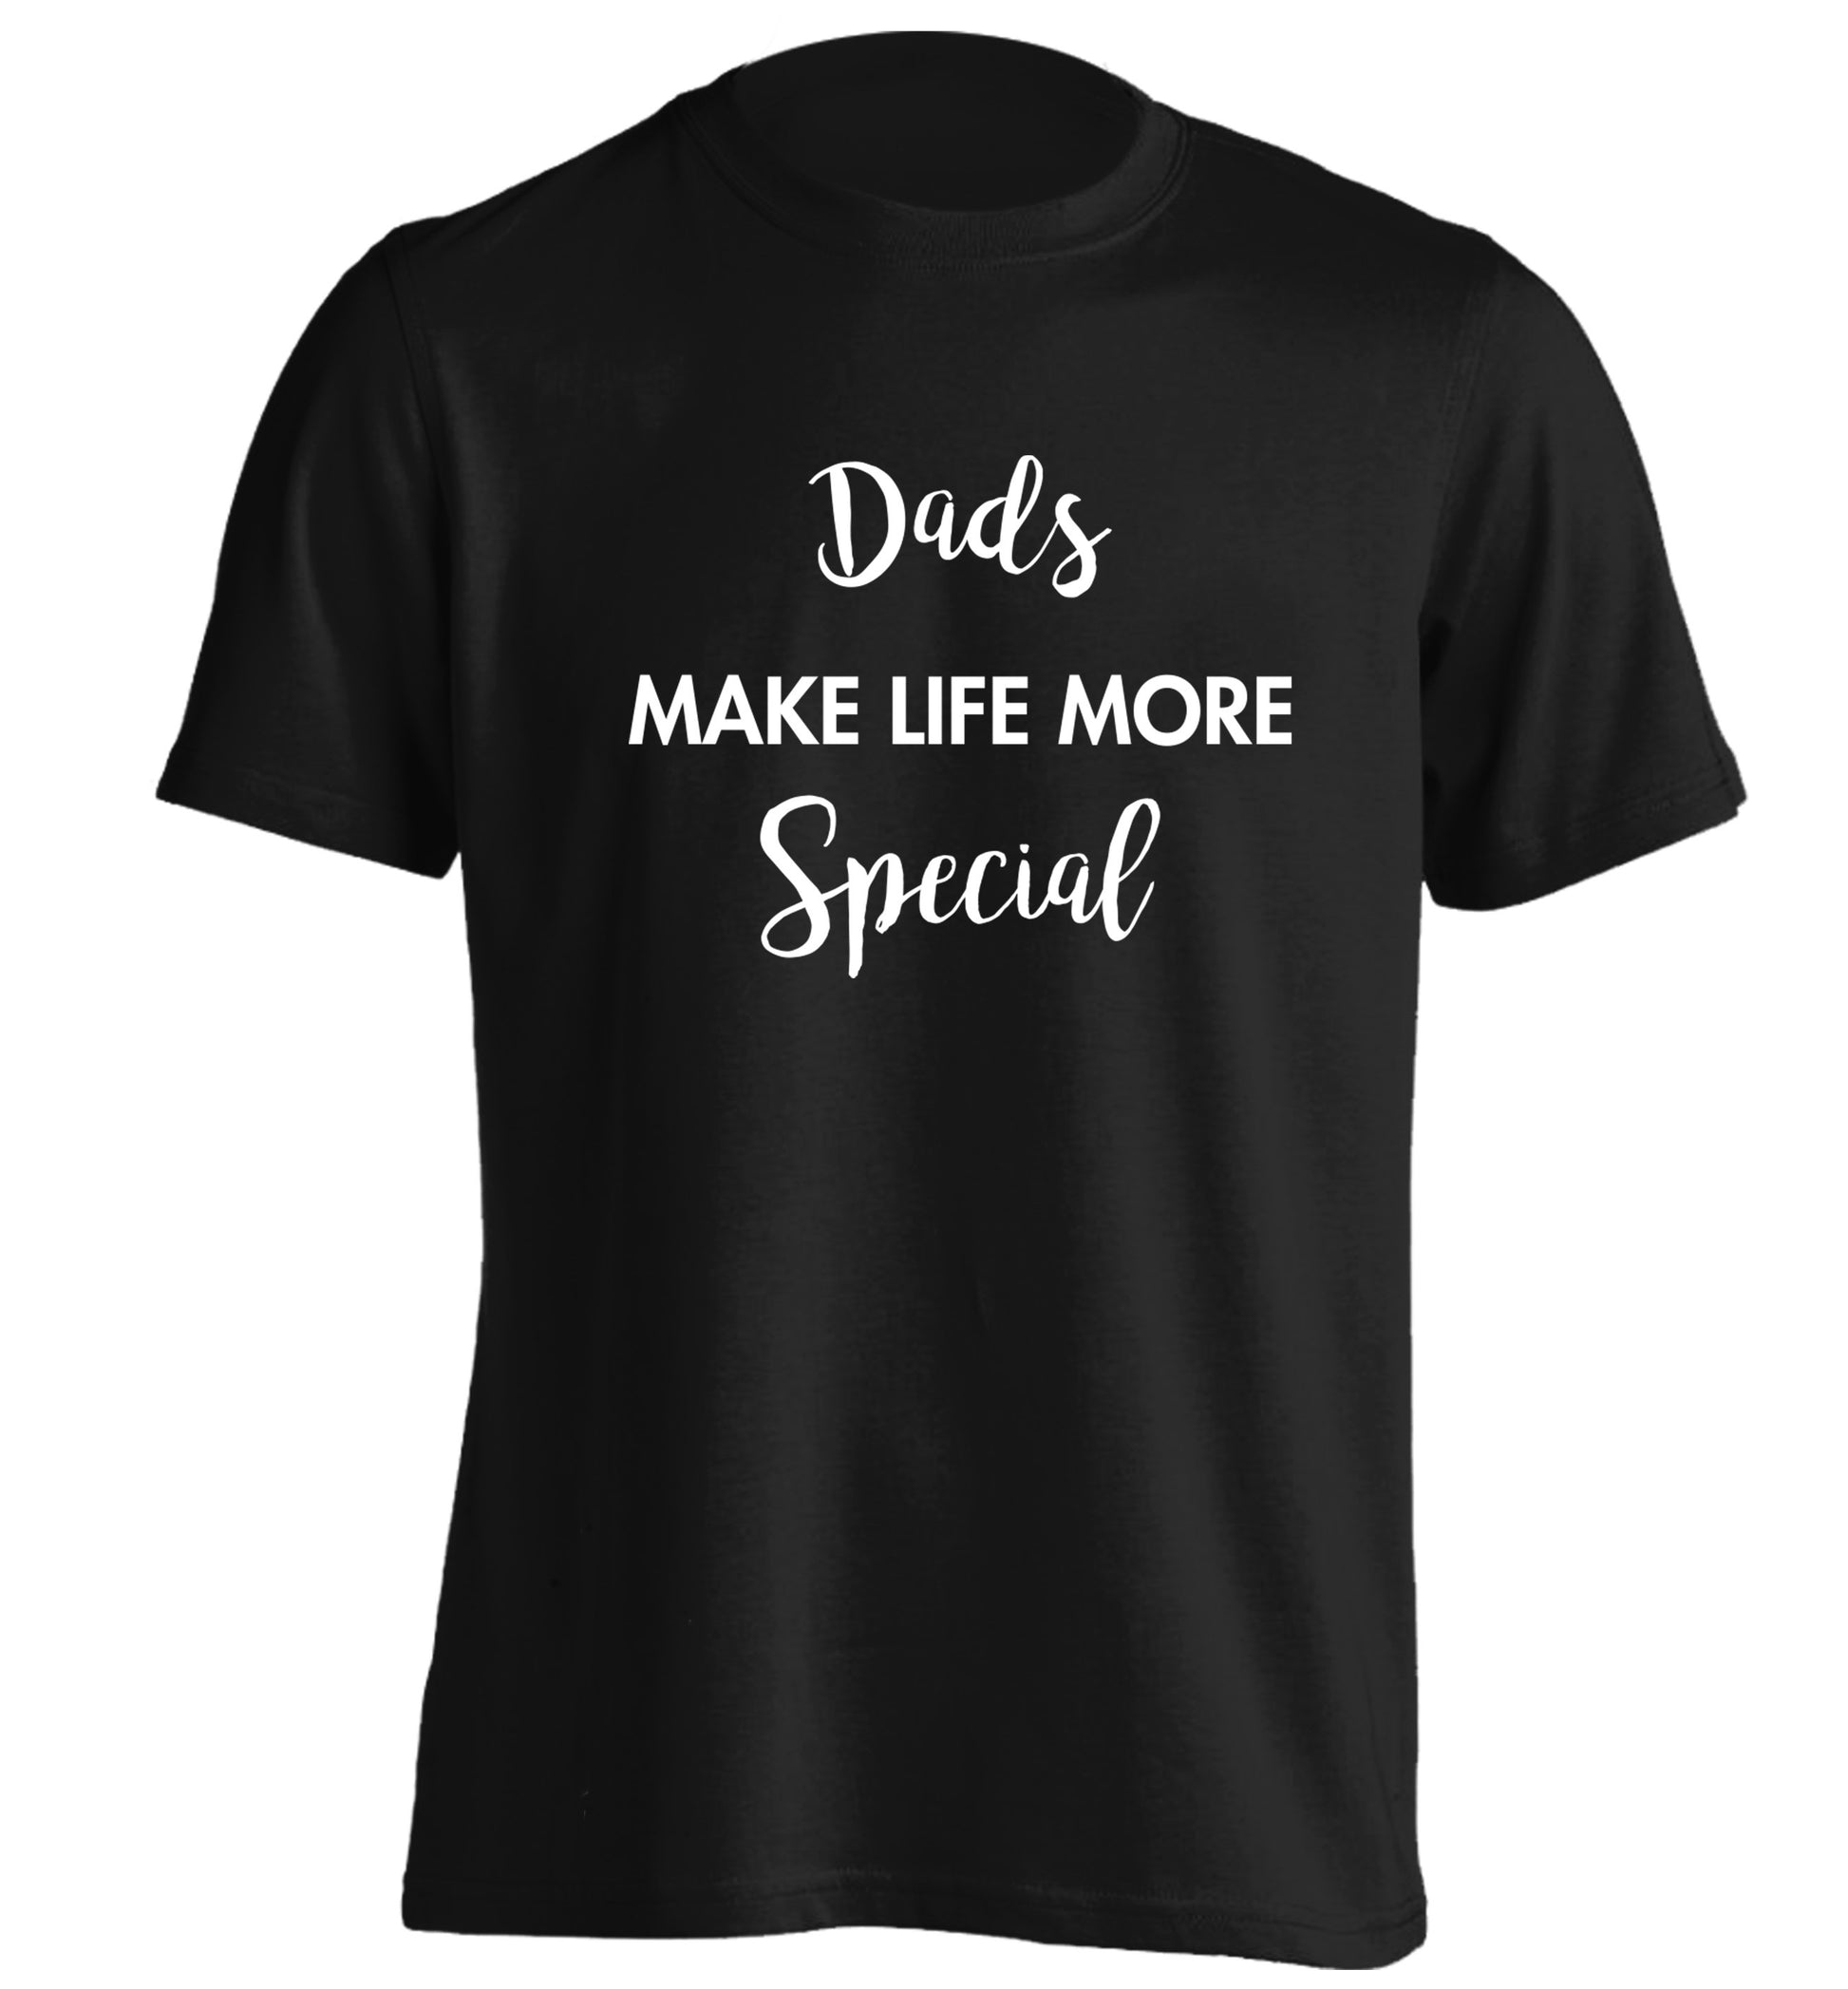 Dads make life more special adults unisex black Tshirt 2XL